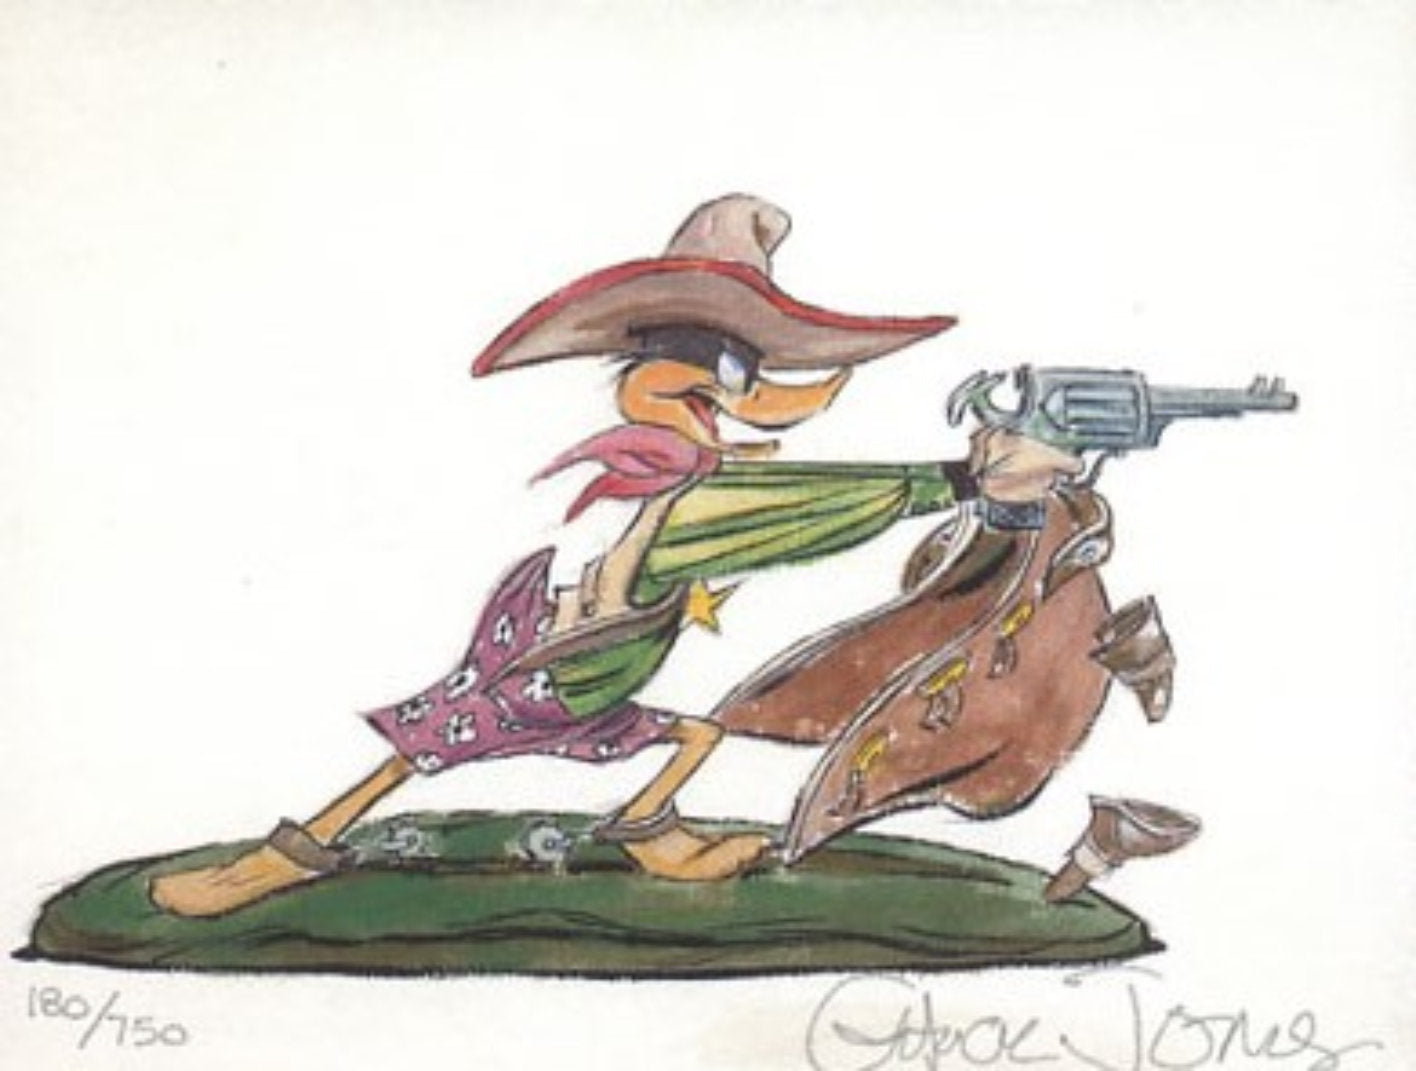 Chuck Jones Drip-A-Long Daffy Duck Warner Brothers Giclee on Paper Limited Edition of 750